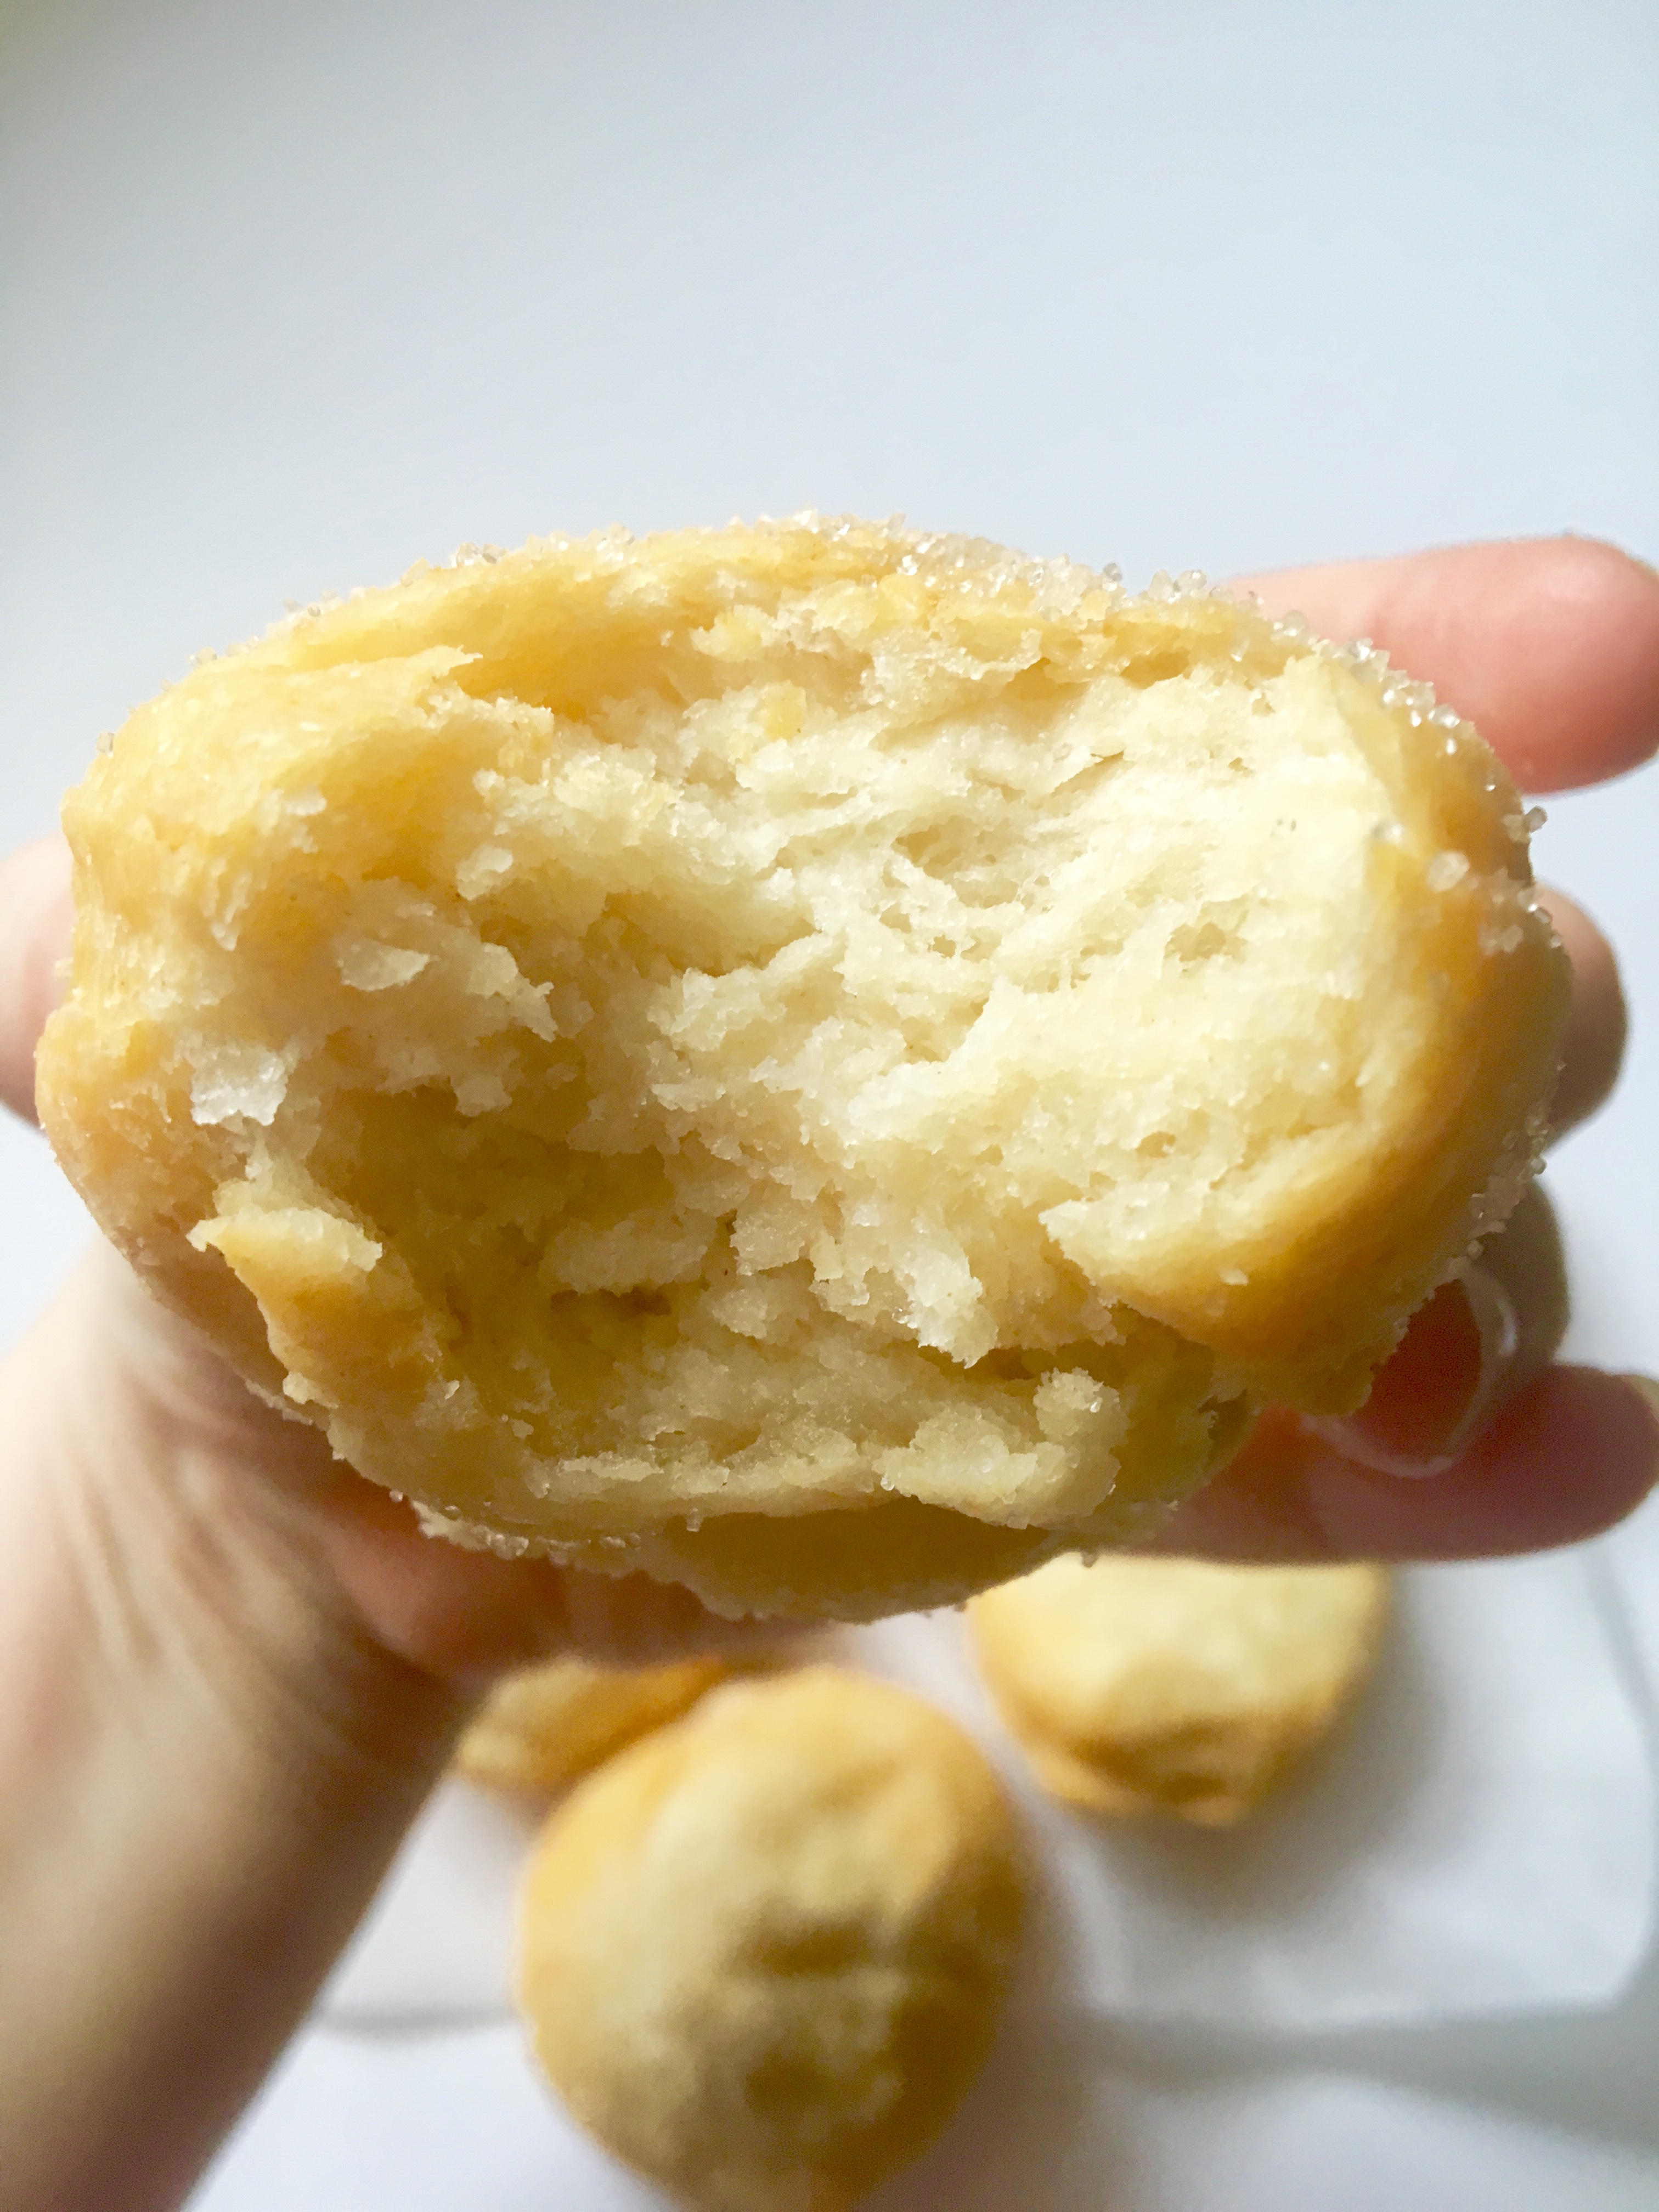 Vegan Chinese Takeout Style Doughnuts - the most glorious fried balls of dough rolled in sugar! Make them in either the air fryer or deep fryer; instructions for both included! // plantpowercouple.com